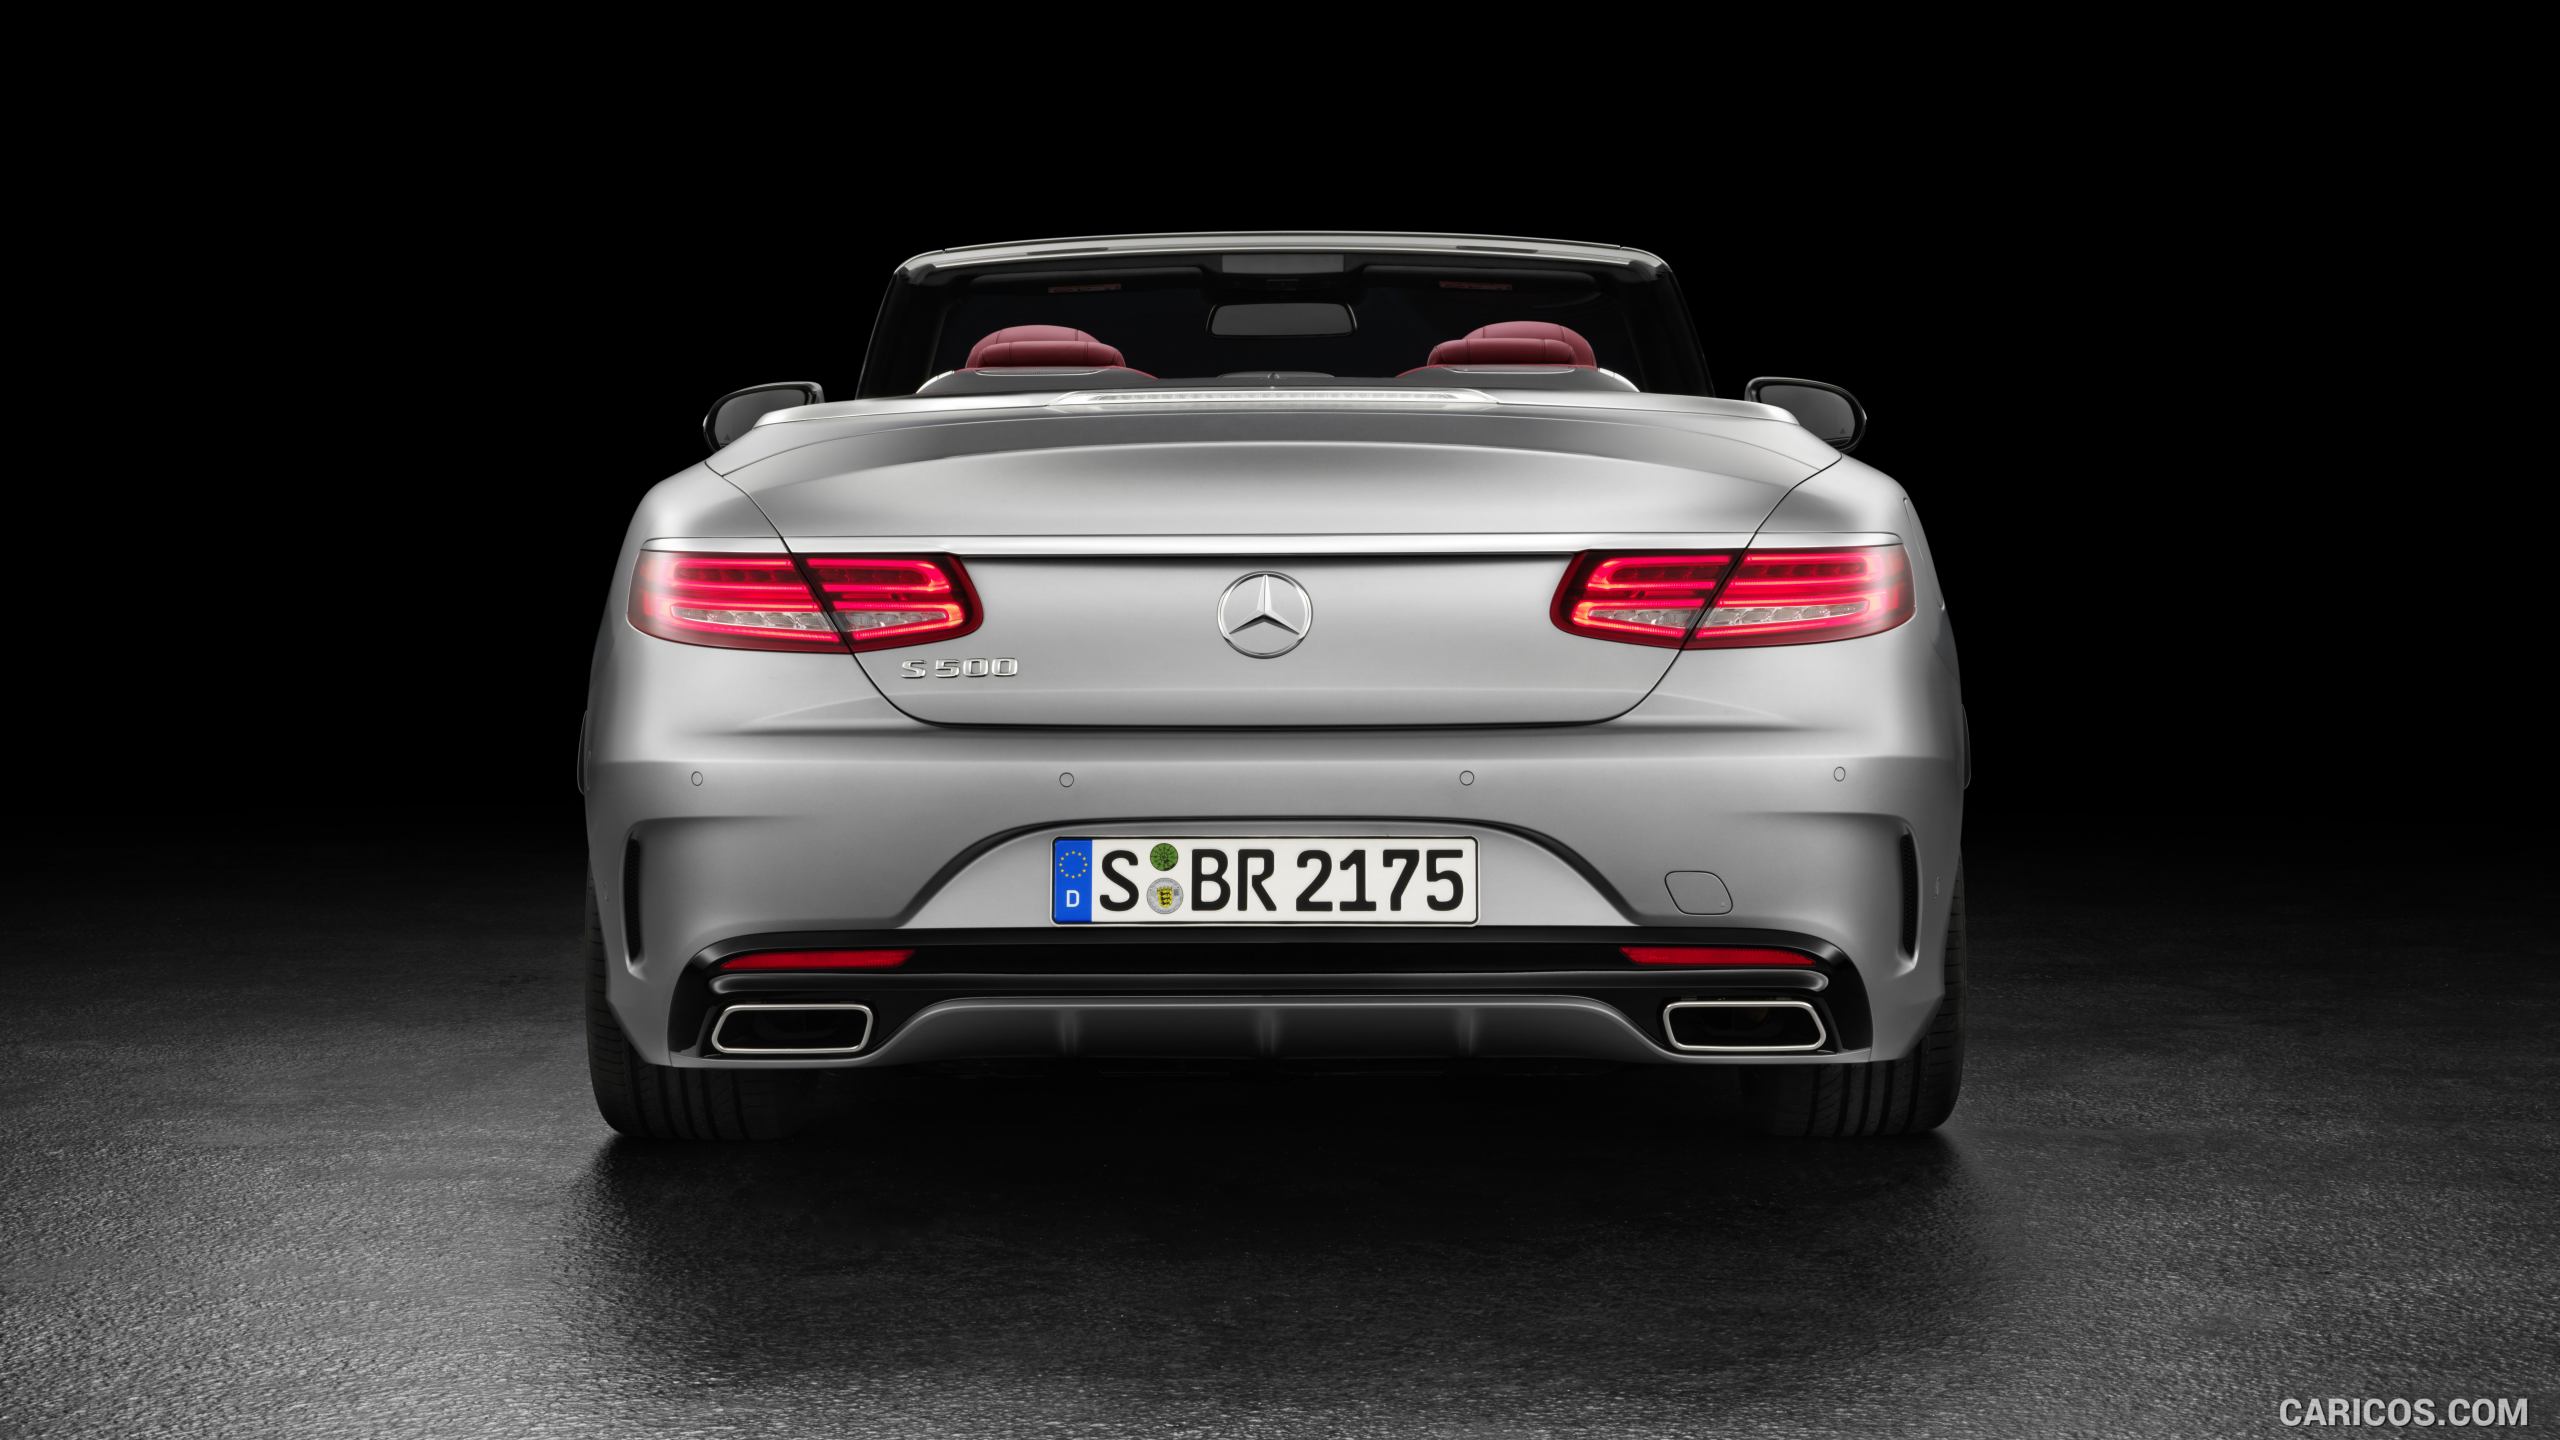 2017 Mercedes-Benz S-Class S500 Cabriolet AMG-line (Alanit Grey Magno) - Rear, #31 of 56